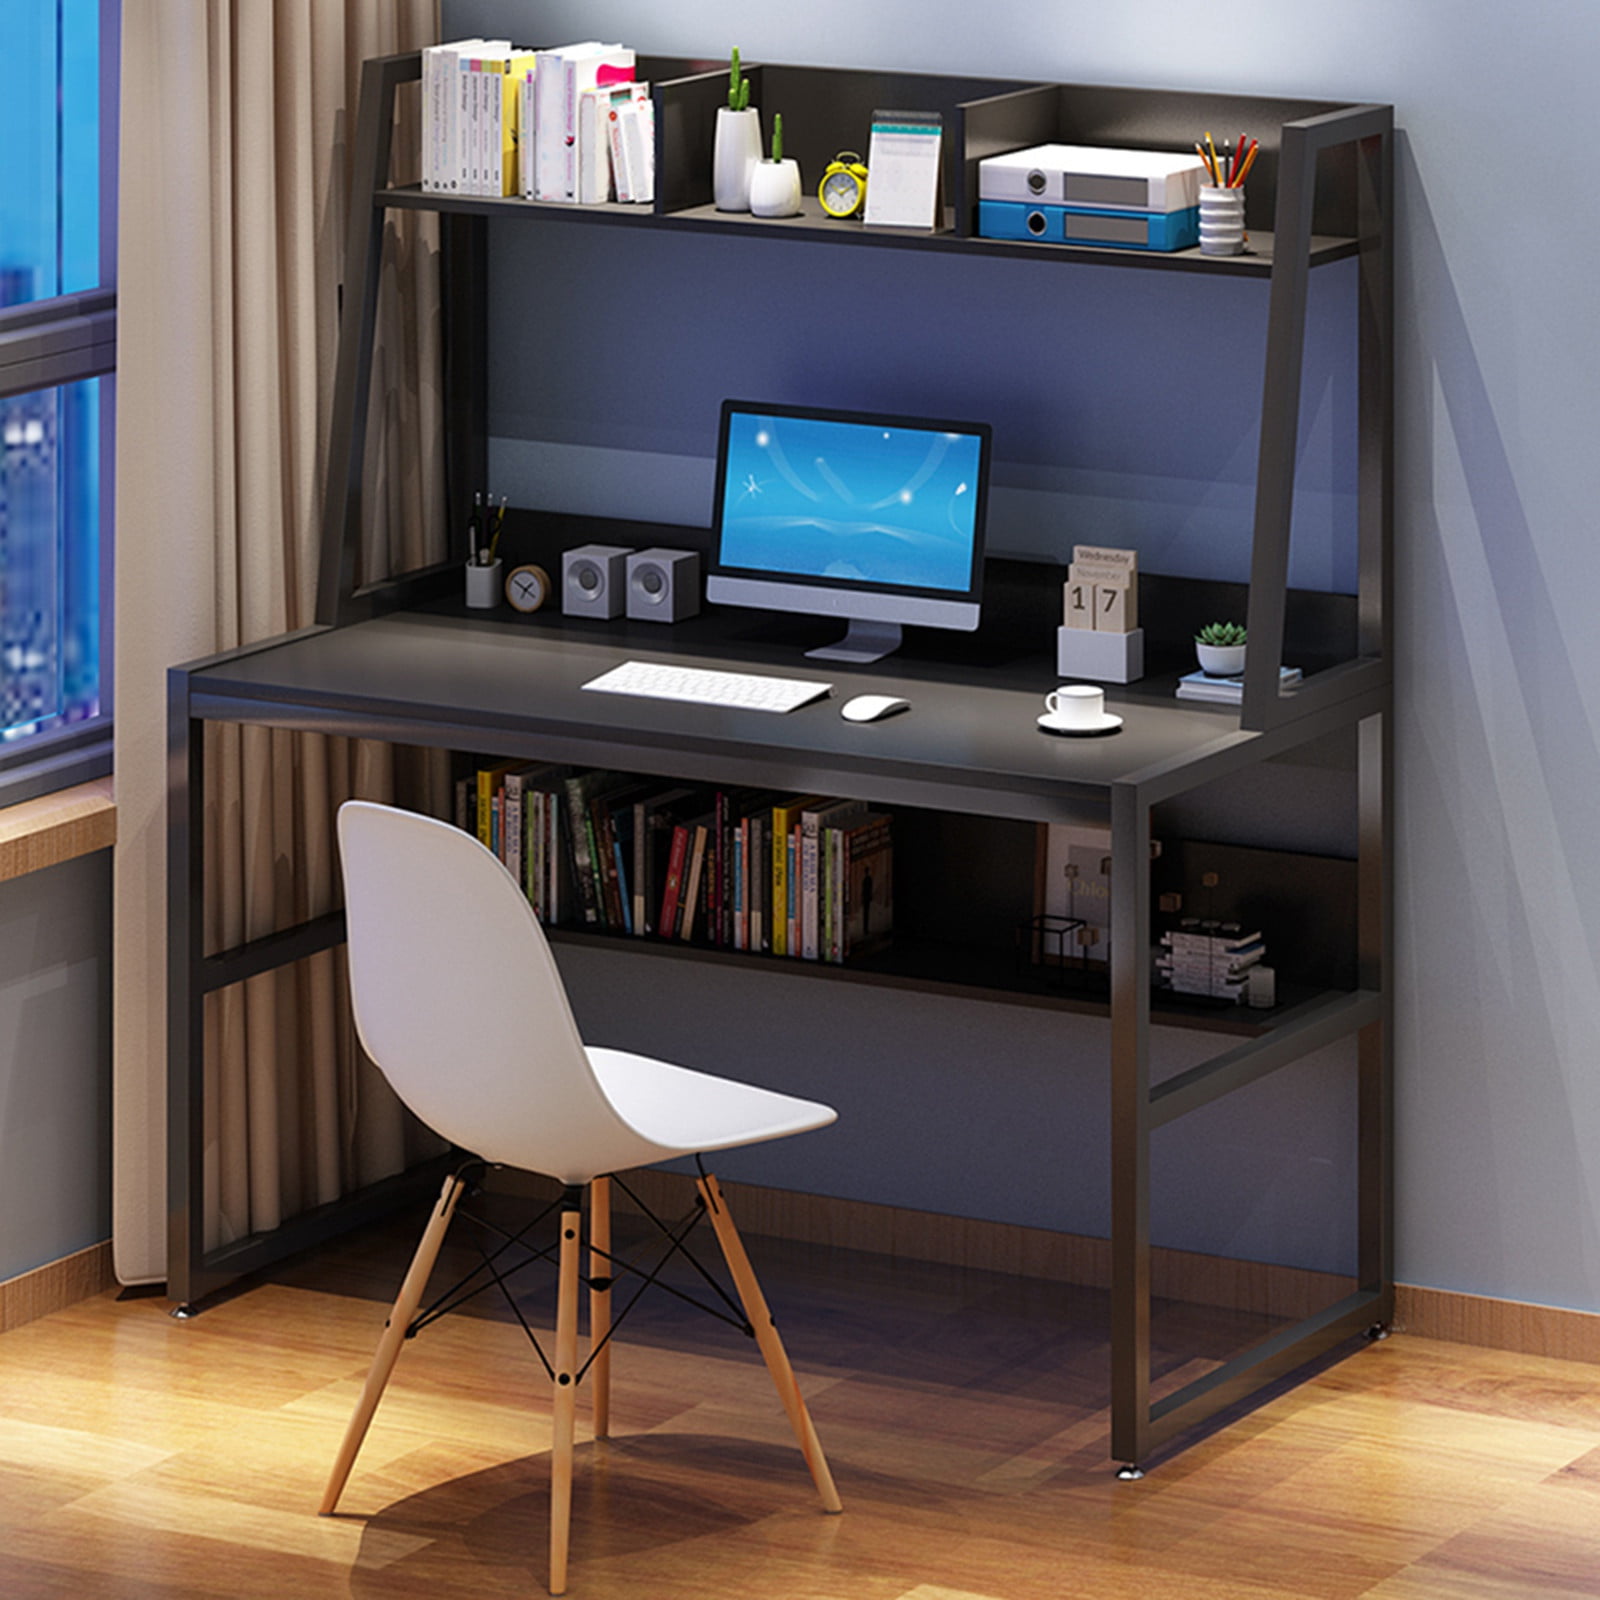 Details about   47-inch Computer Desk With Bookshelf Home Office Desk Space-Saving Design Table 